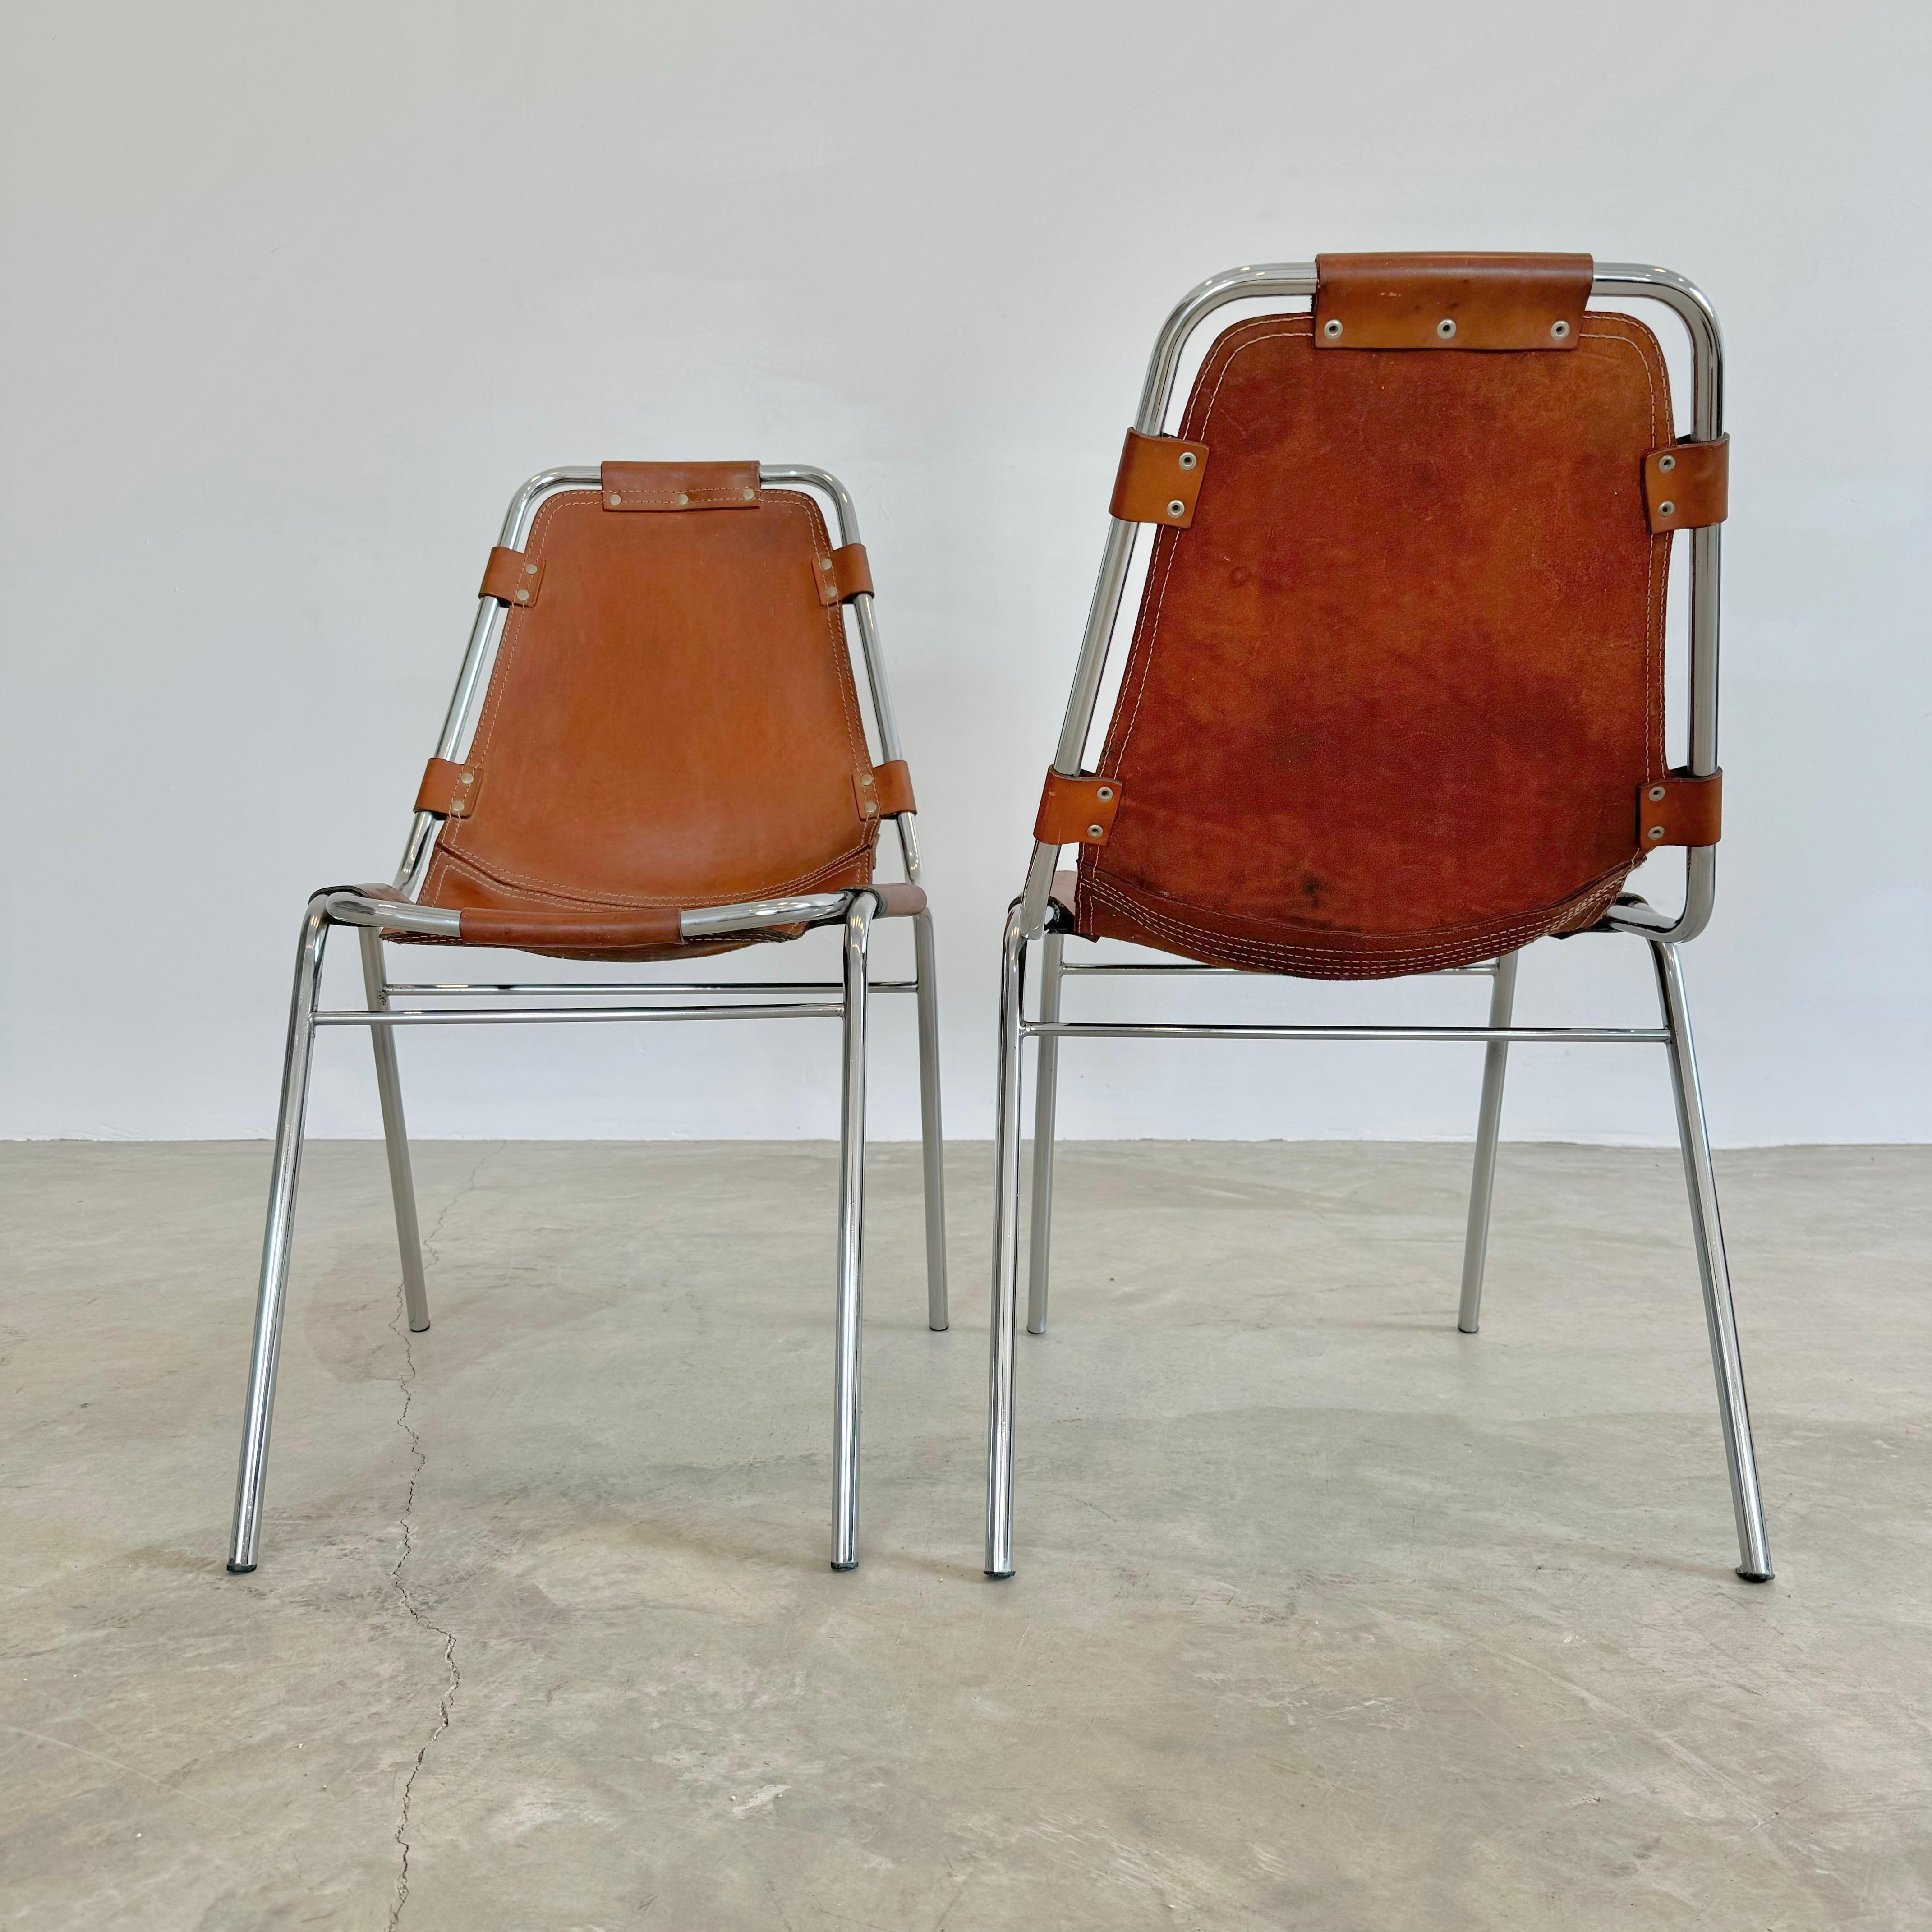 Les Arc Dining Chairs Selected by Charlotte Perriand, 1960s France For Sale 11